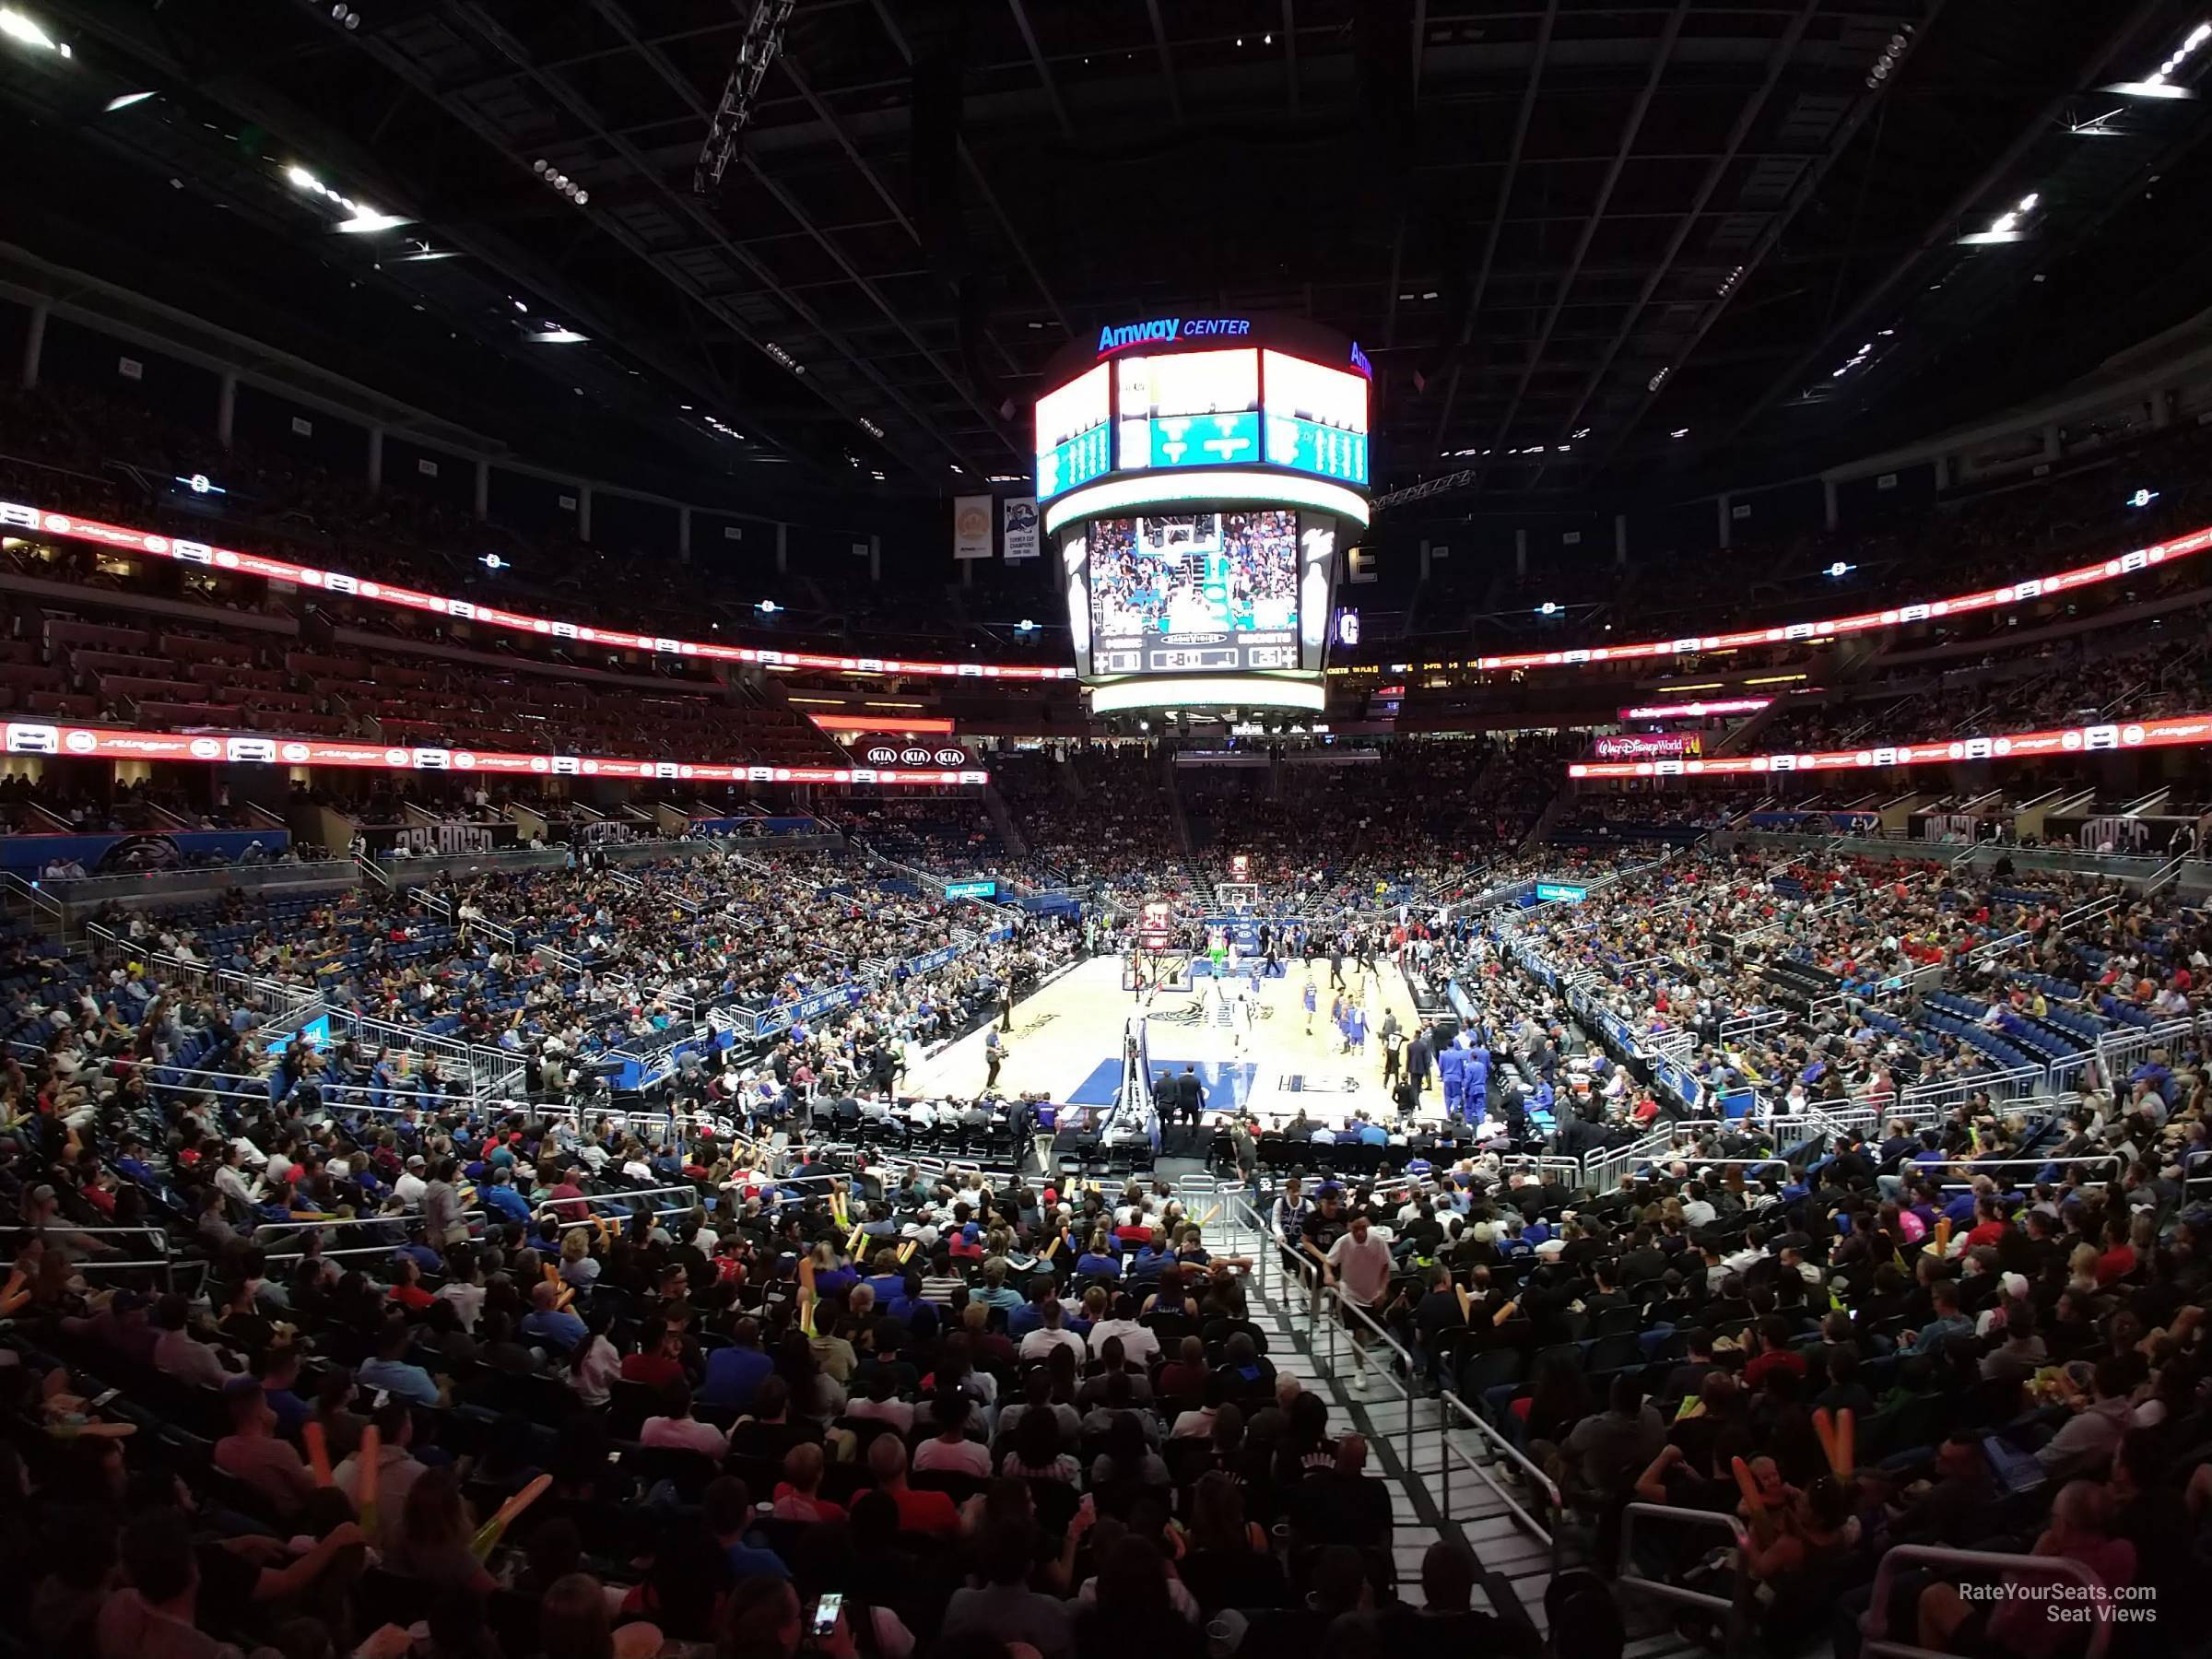 section 110, row 22 seat view  for basketball - amway center